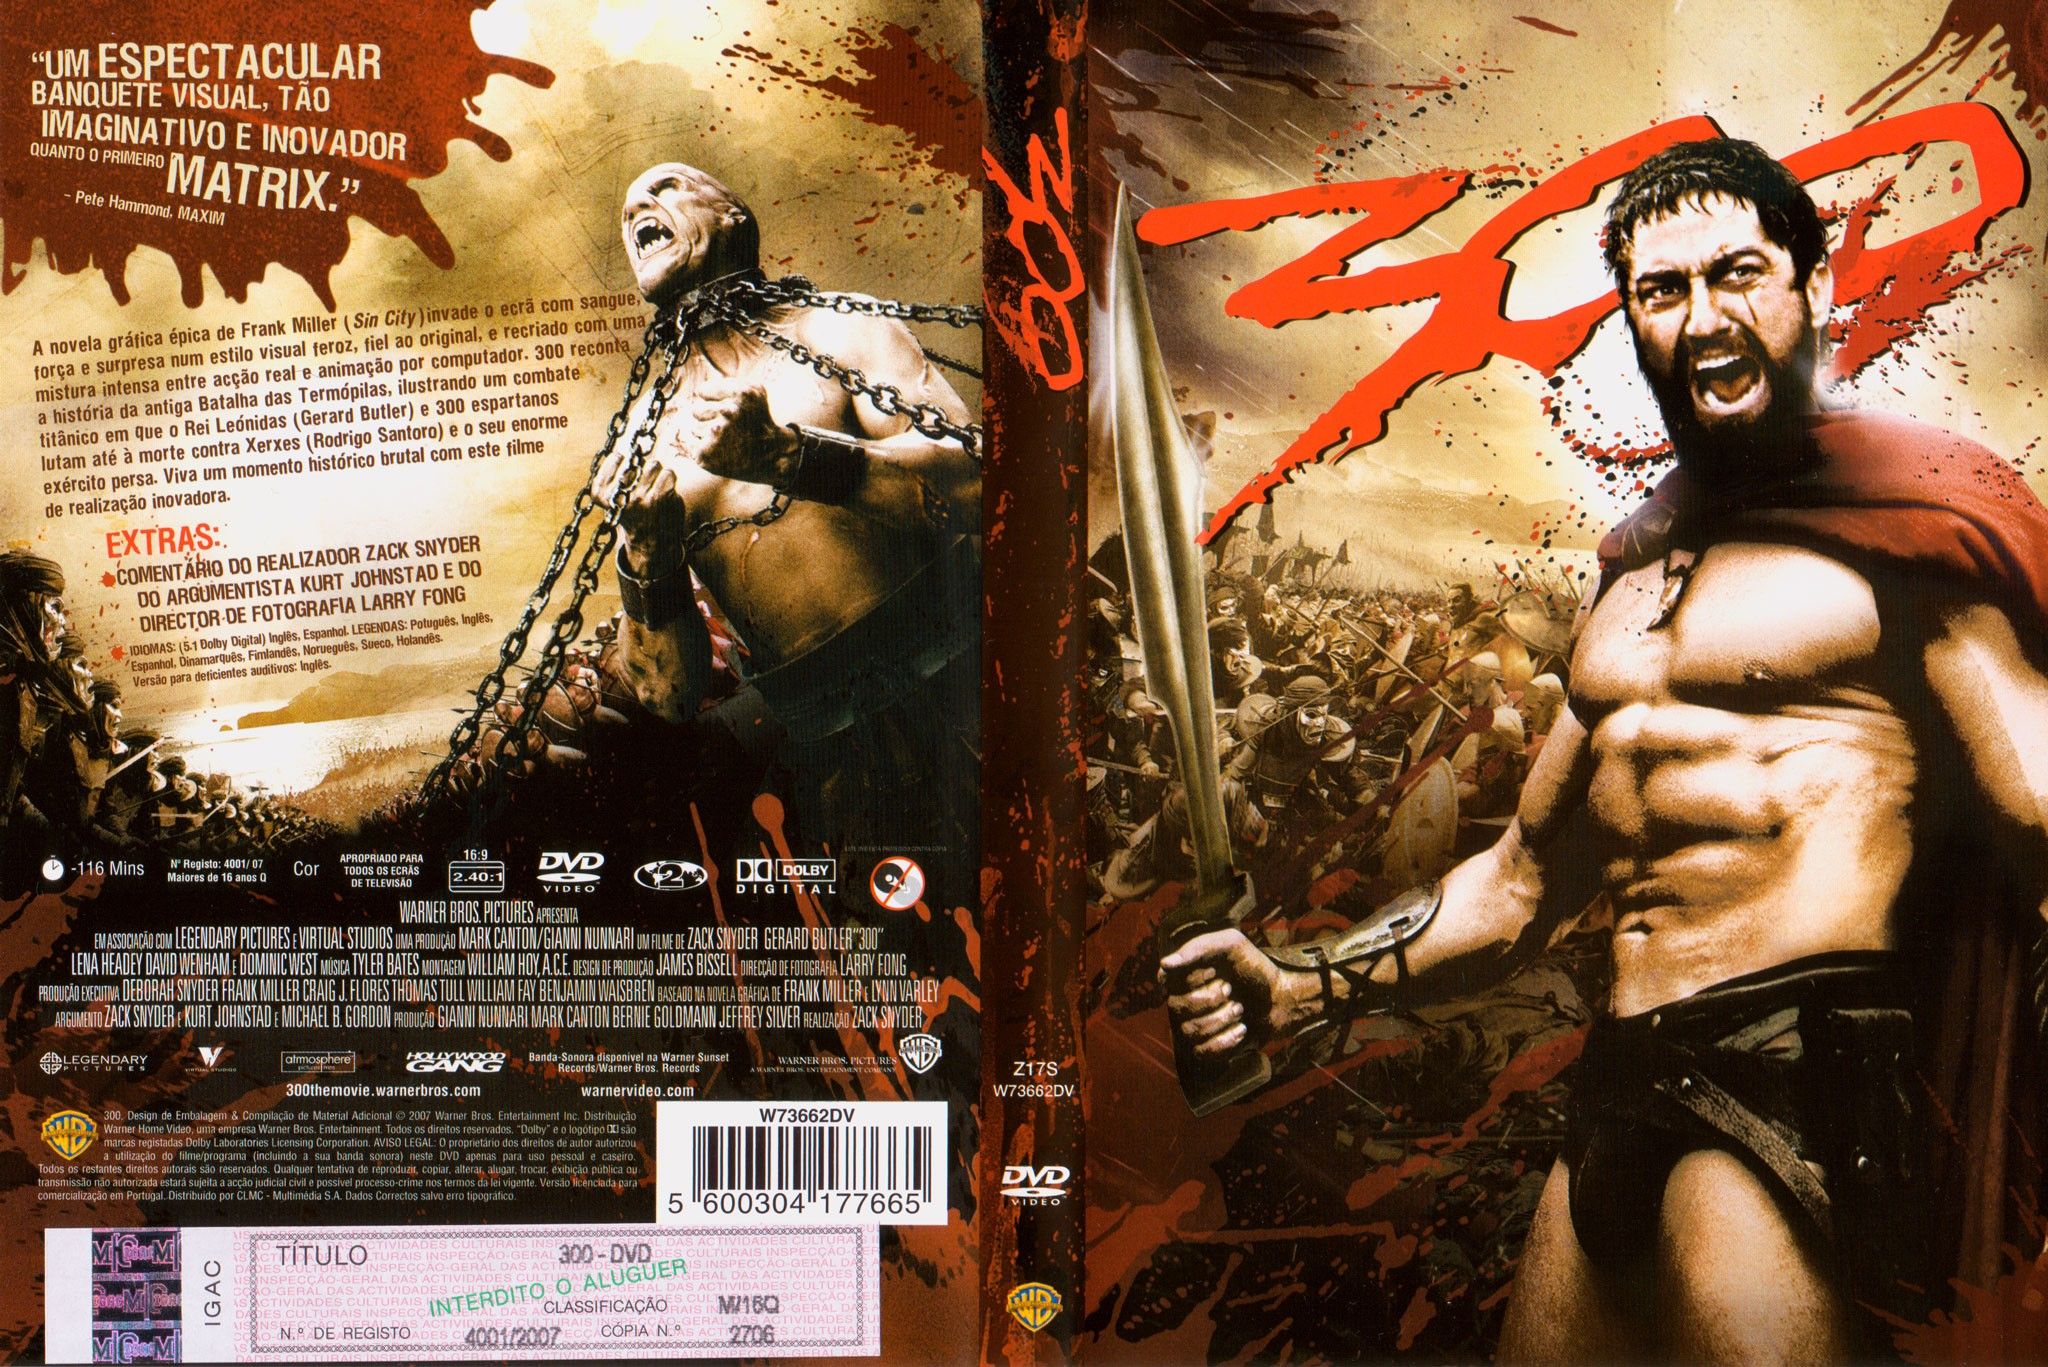  300  DVD  PT DVD  Covers Cover Century Over 500 000 